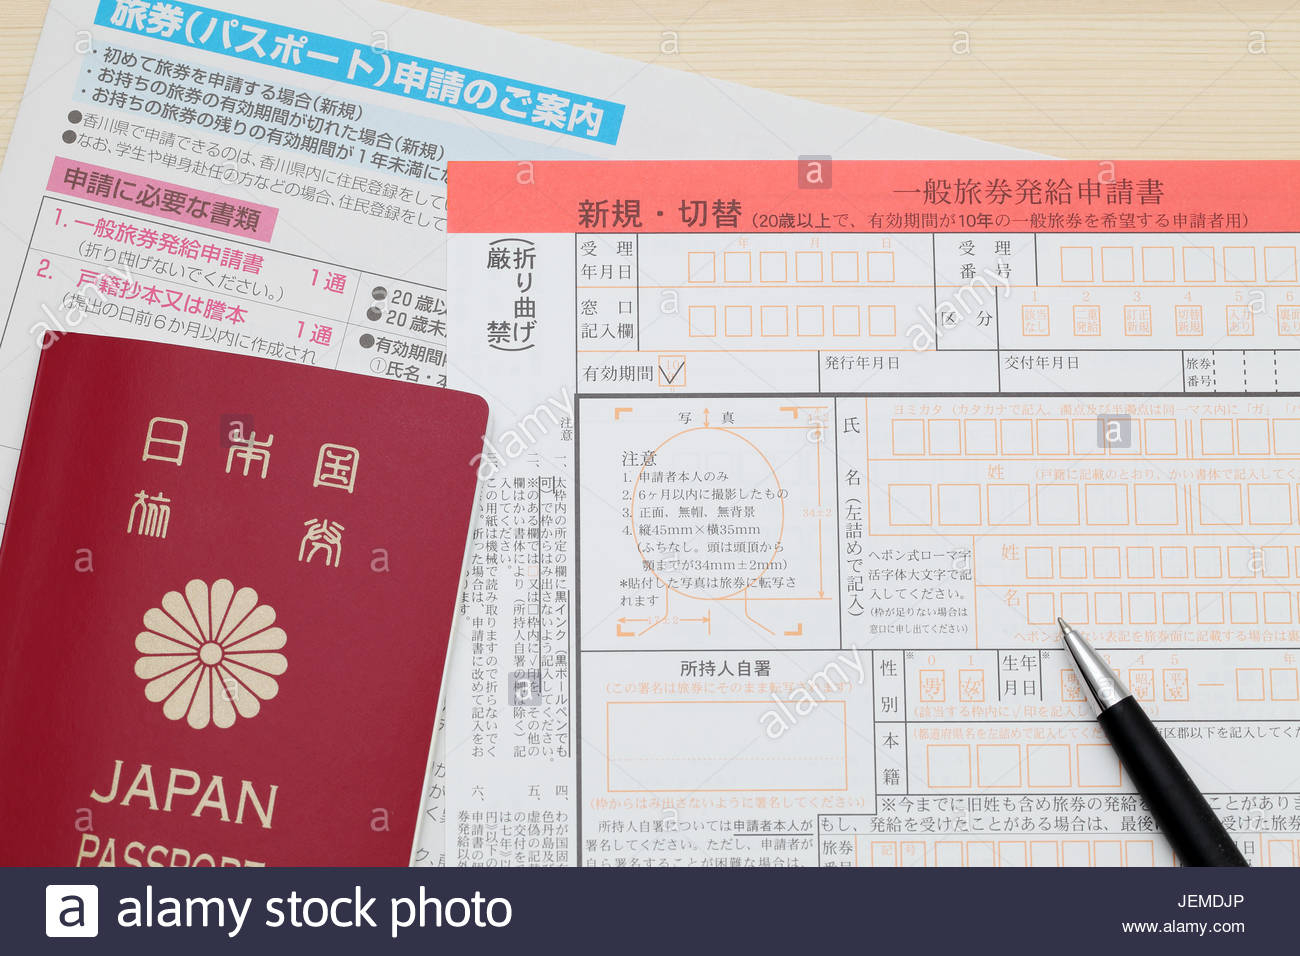 Application For Japanese Passport With A Pen Stock Photo 